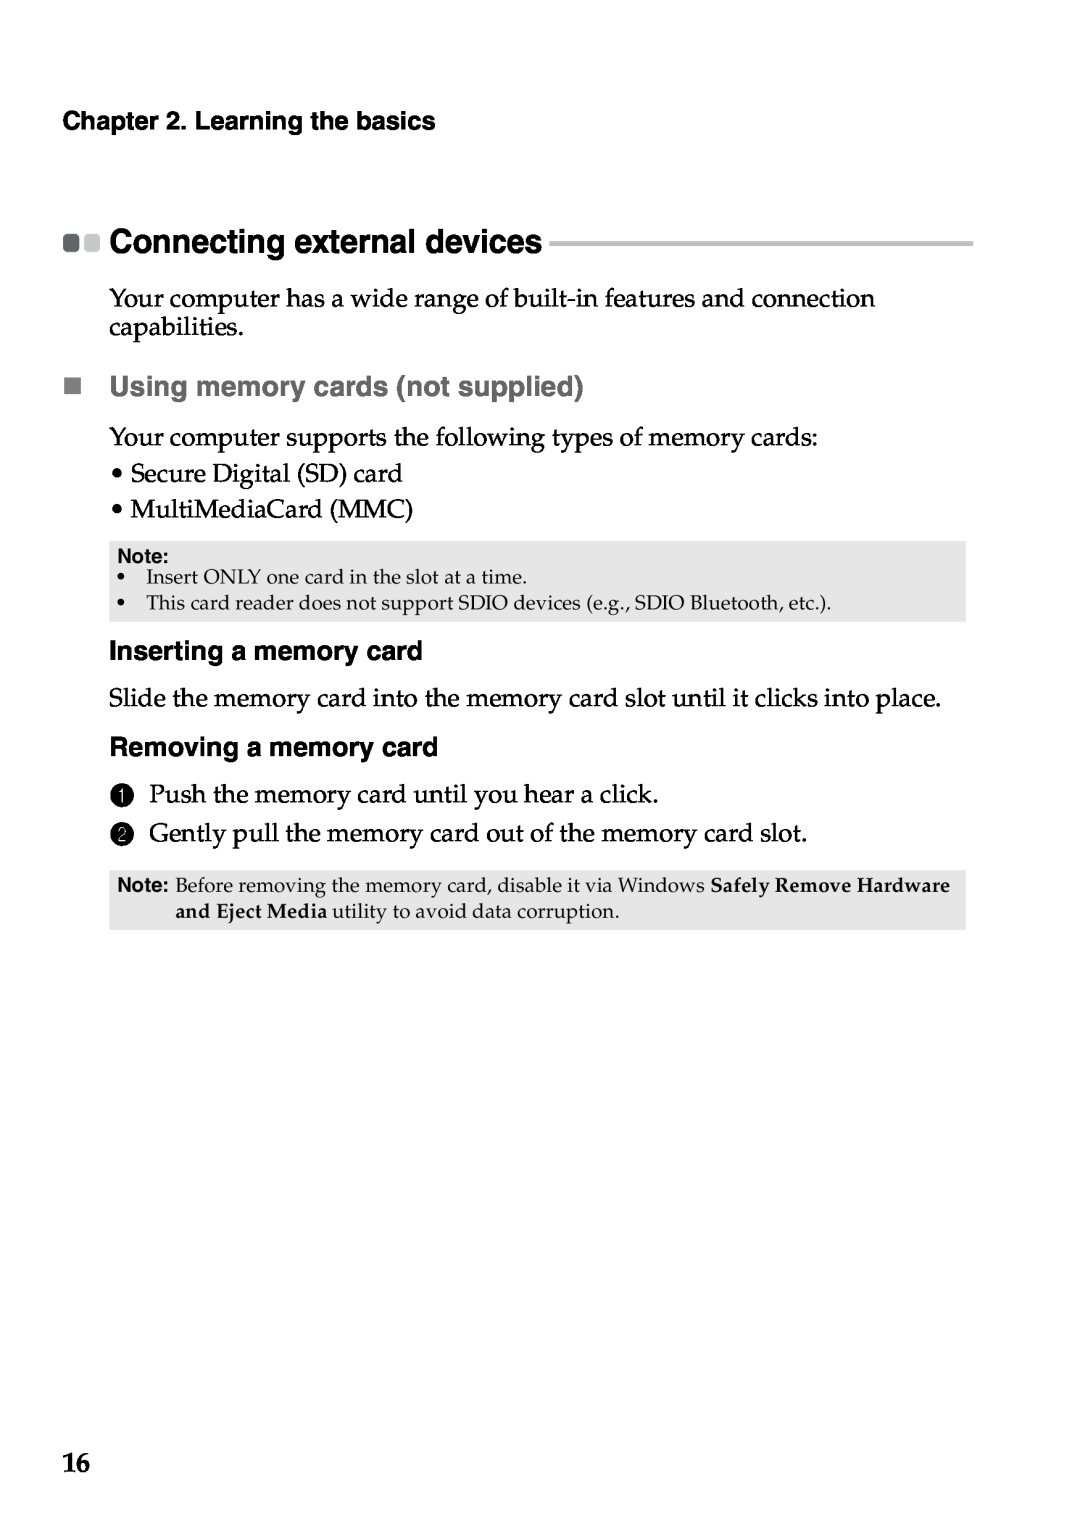 Lenovo S400 Connecting external devices, „ Using memory cards not supplied, Inserting a memory card, Learning the basics 